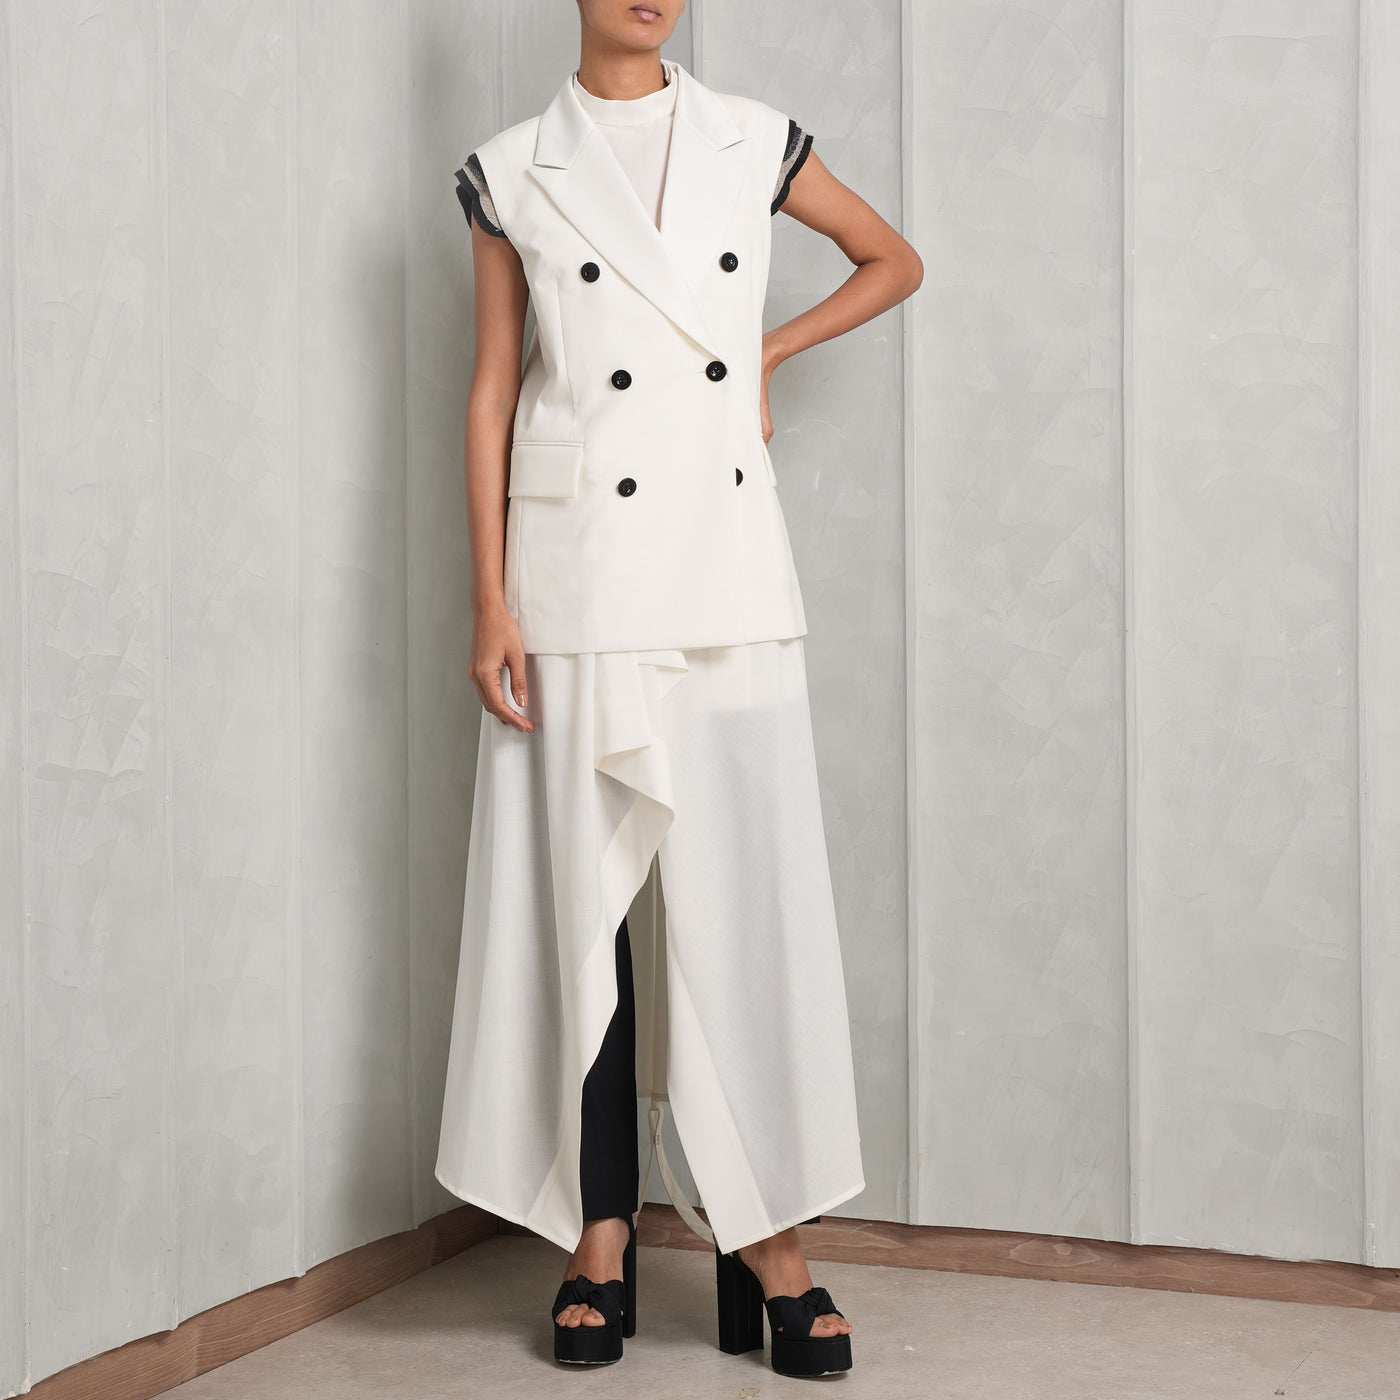 SACAI White Suiting Mix Dress with a vertical belt detail